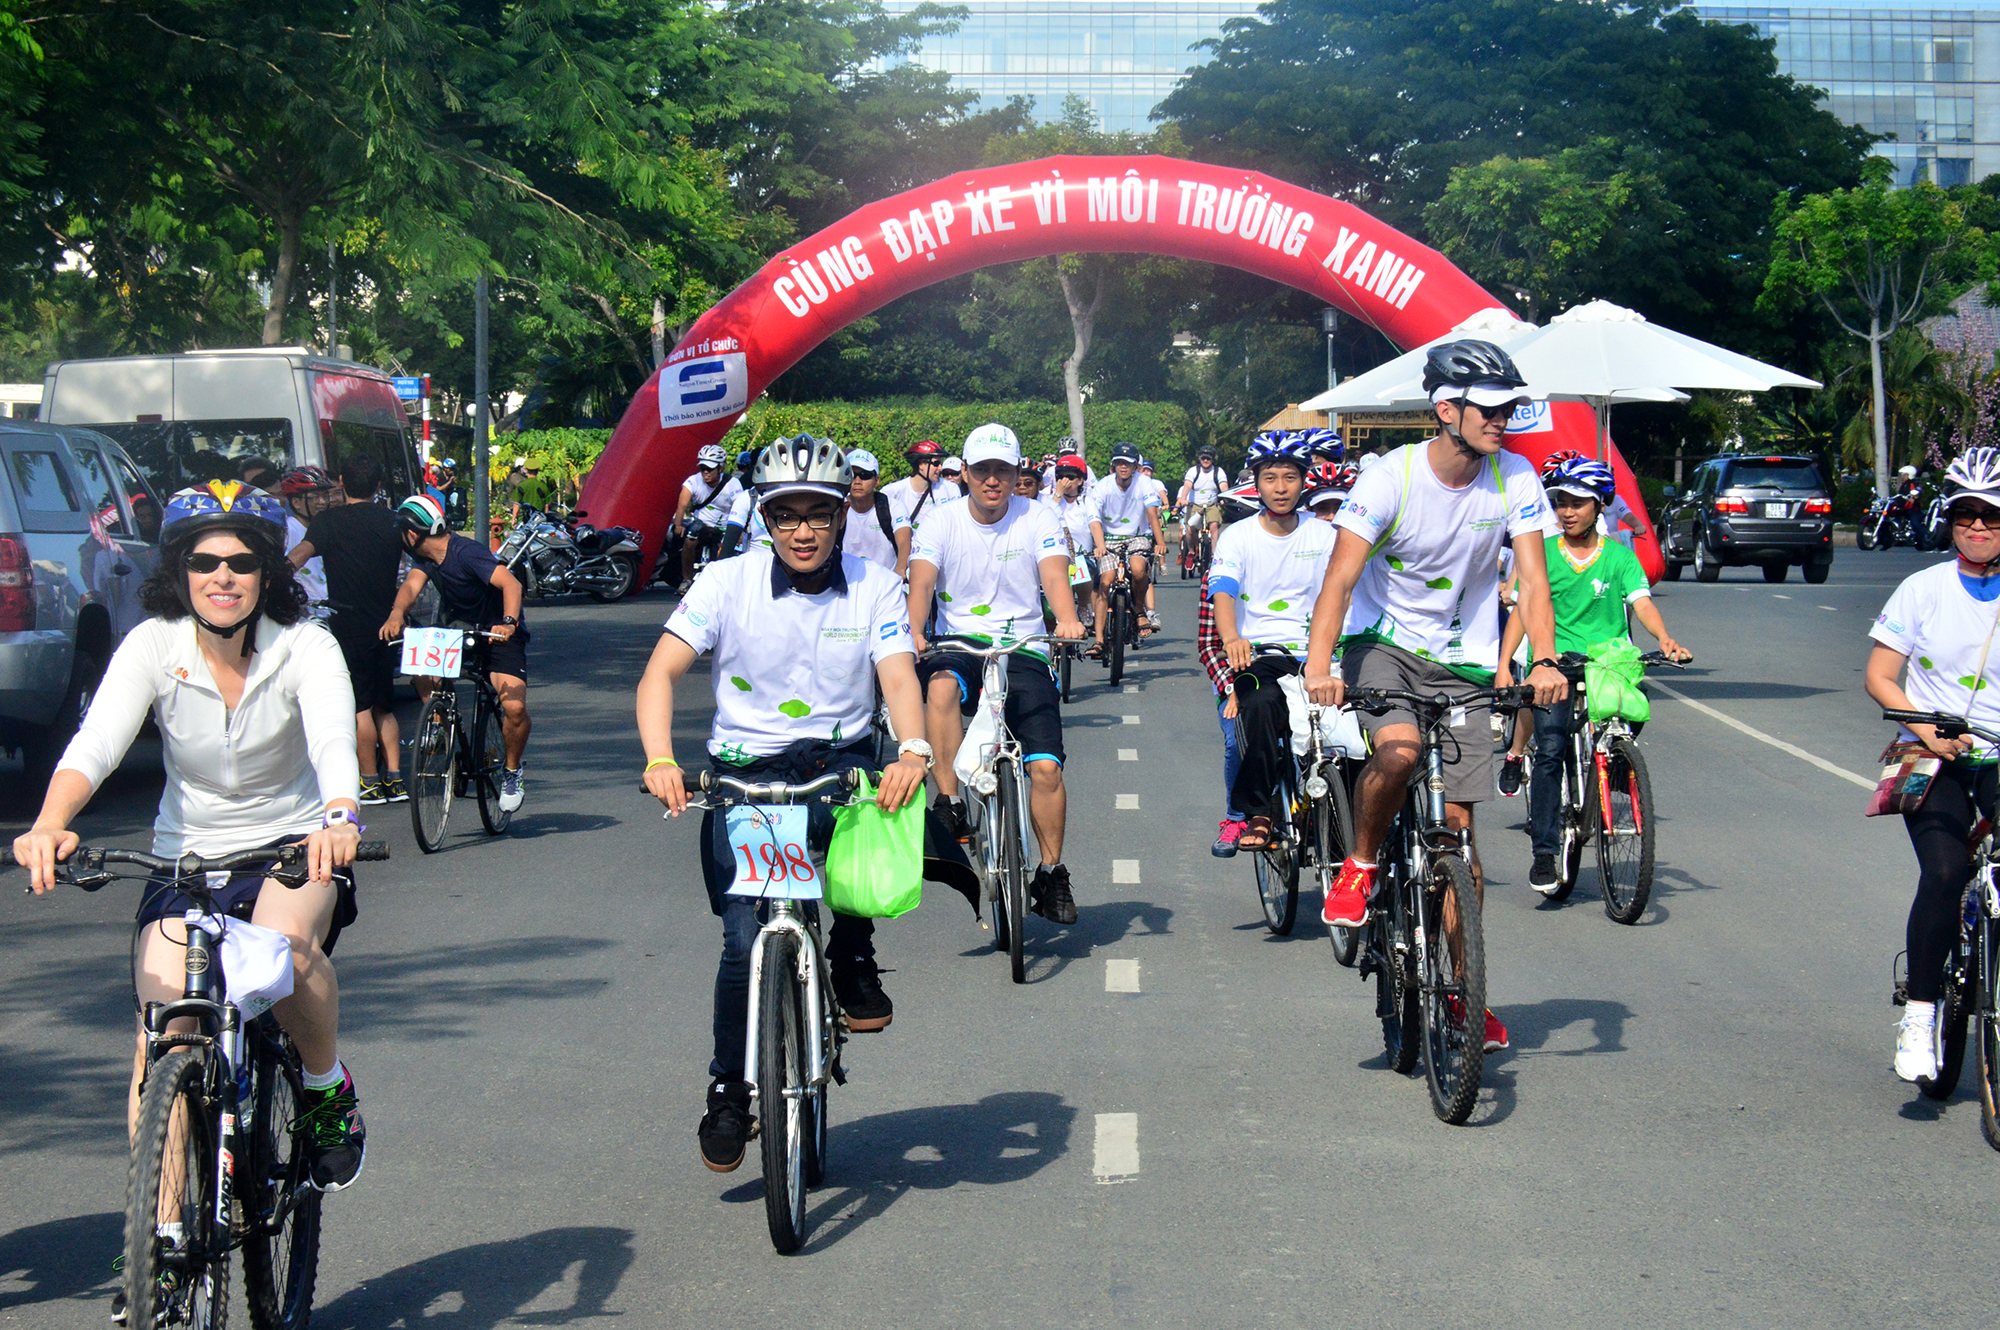 Over 500 cycle for environment in Ho Chi Minh City